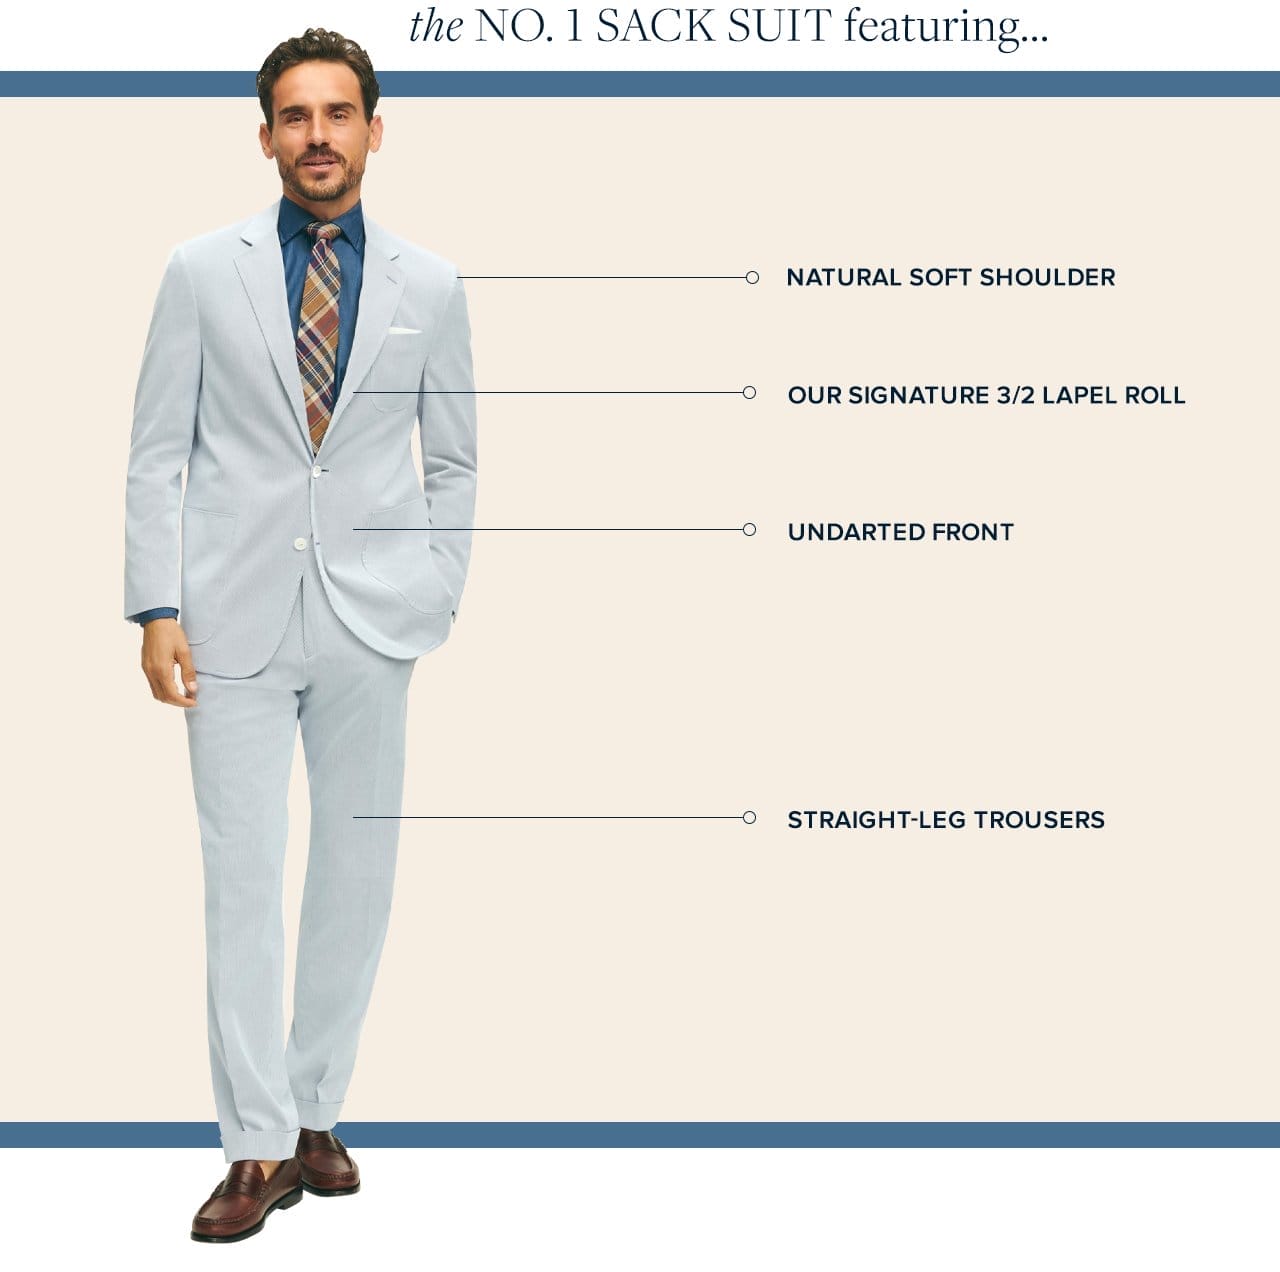 the No. 1 Sack Suit featuring... Natural Soft Shoulder, Our Signature 3/2 Lapel Roll, Undarted Front, Straight-Leg Trousers